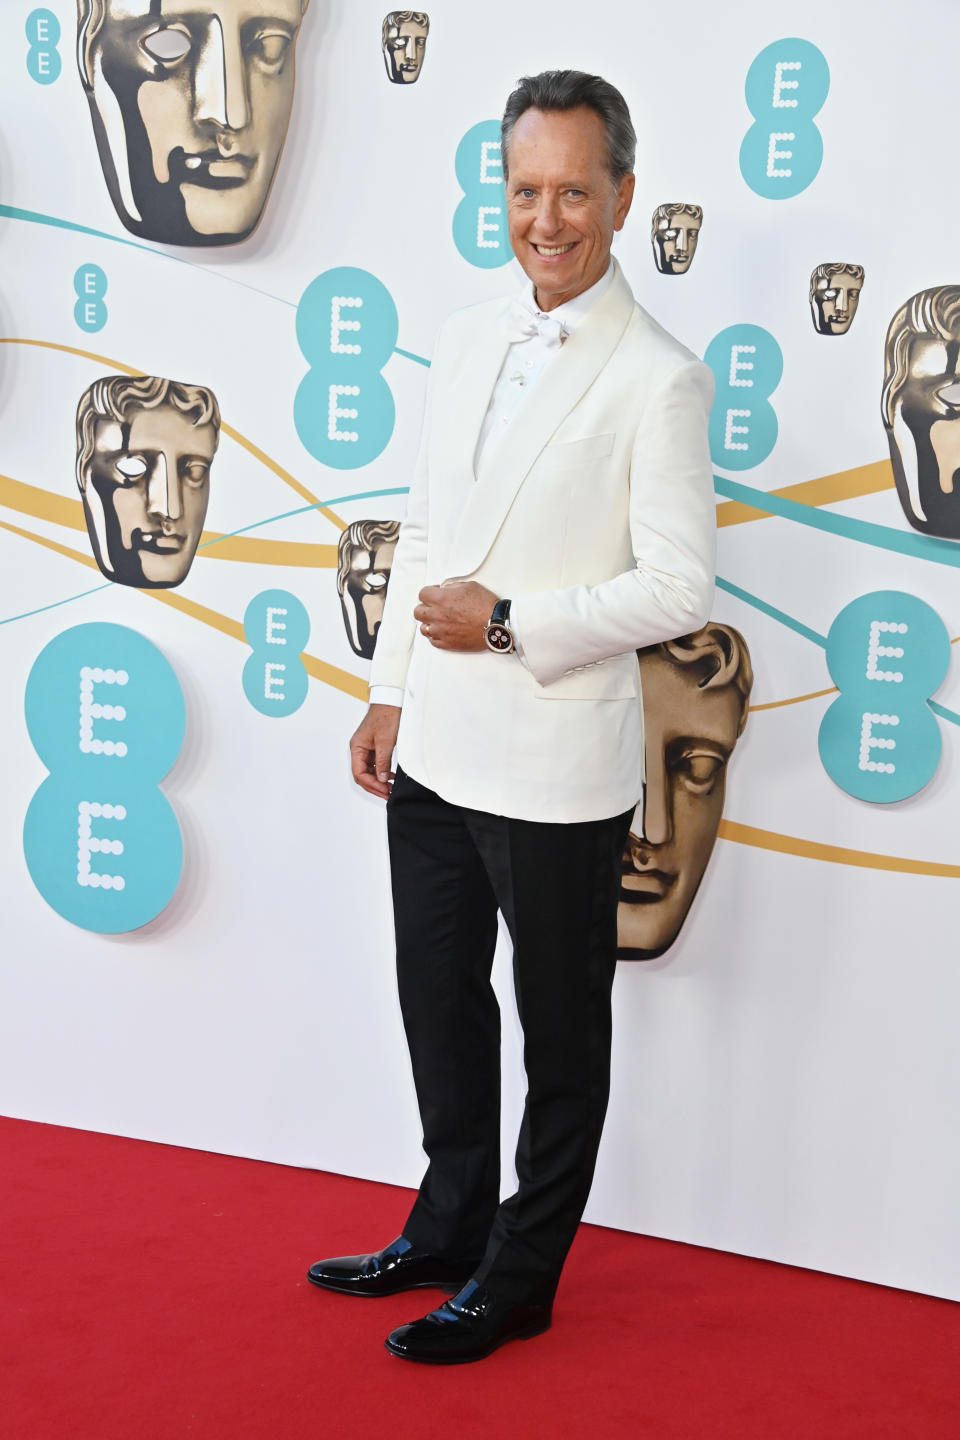 Richard E. Grant arrives at the EE BAFTA Film Awards 2023 at The Royal Festival Hall on February 19, 2023 in London, England